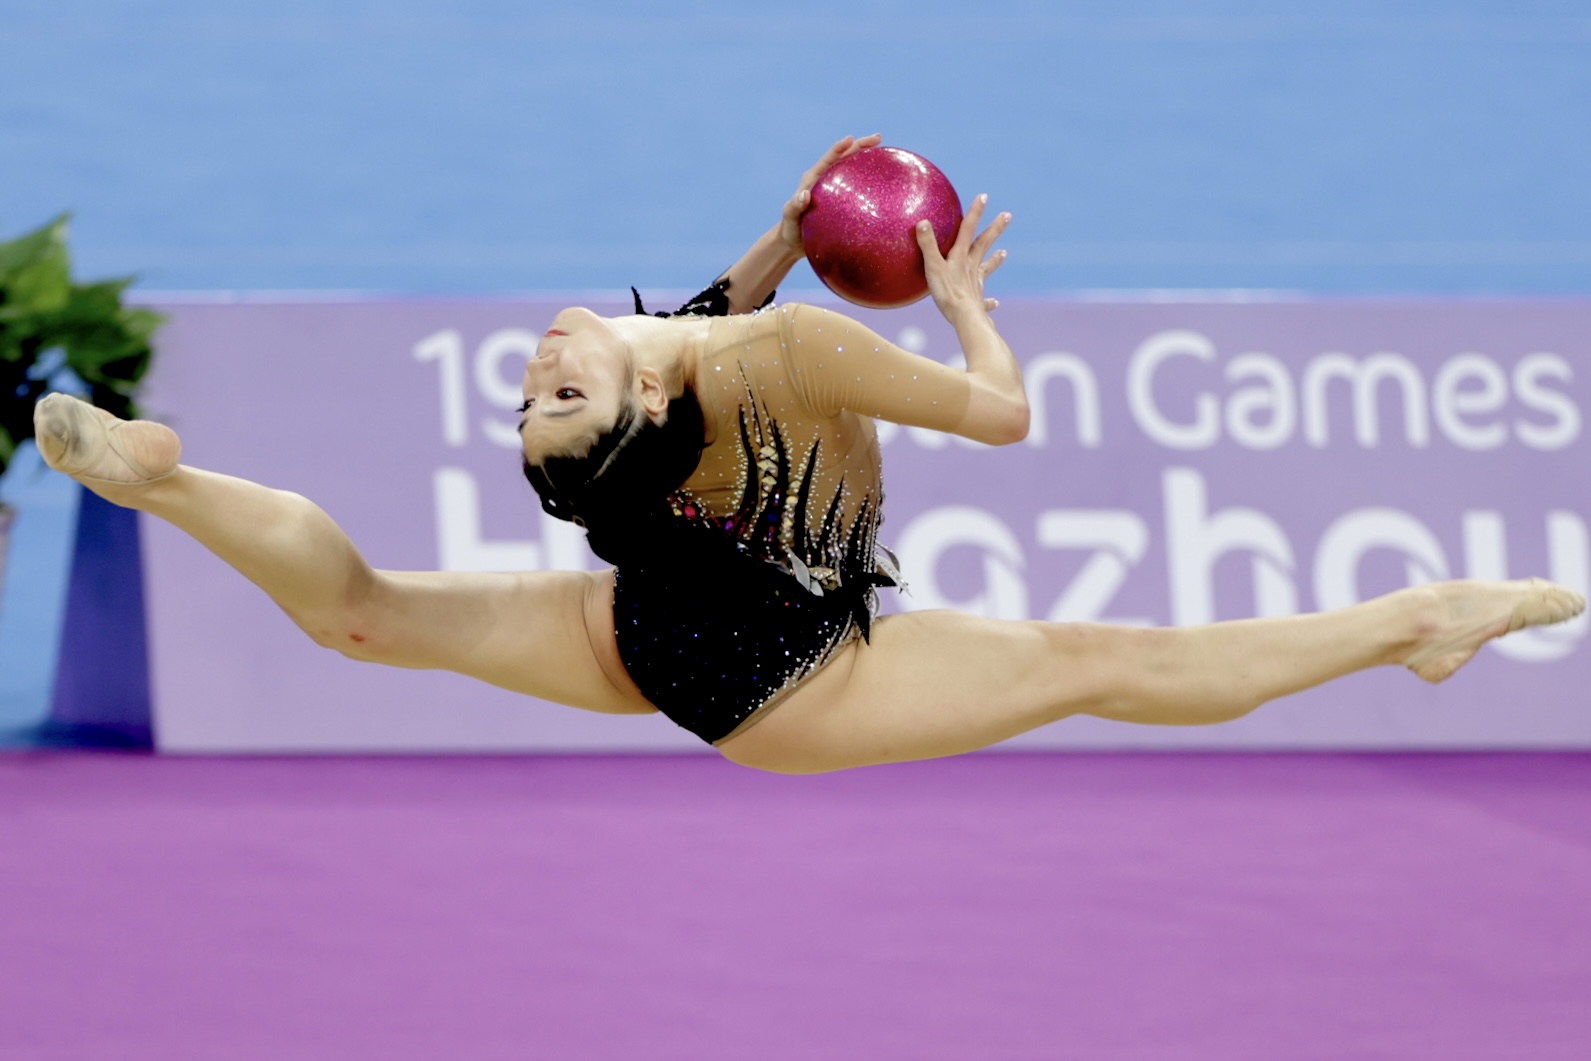 Asiad: painful back, ankle scupper Joe Ee’s plans to shine in rhythmic gymnastics